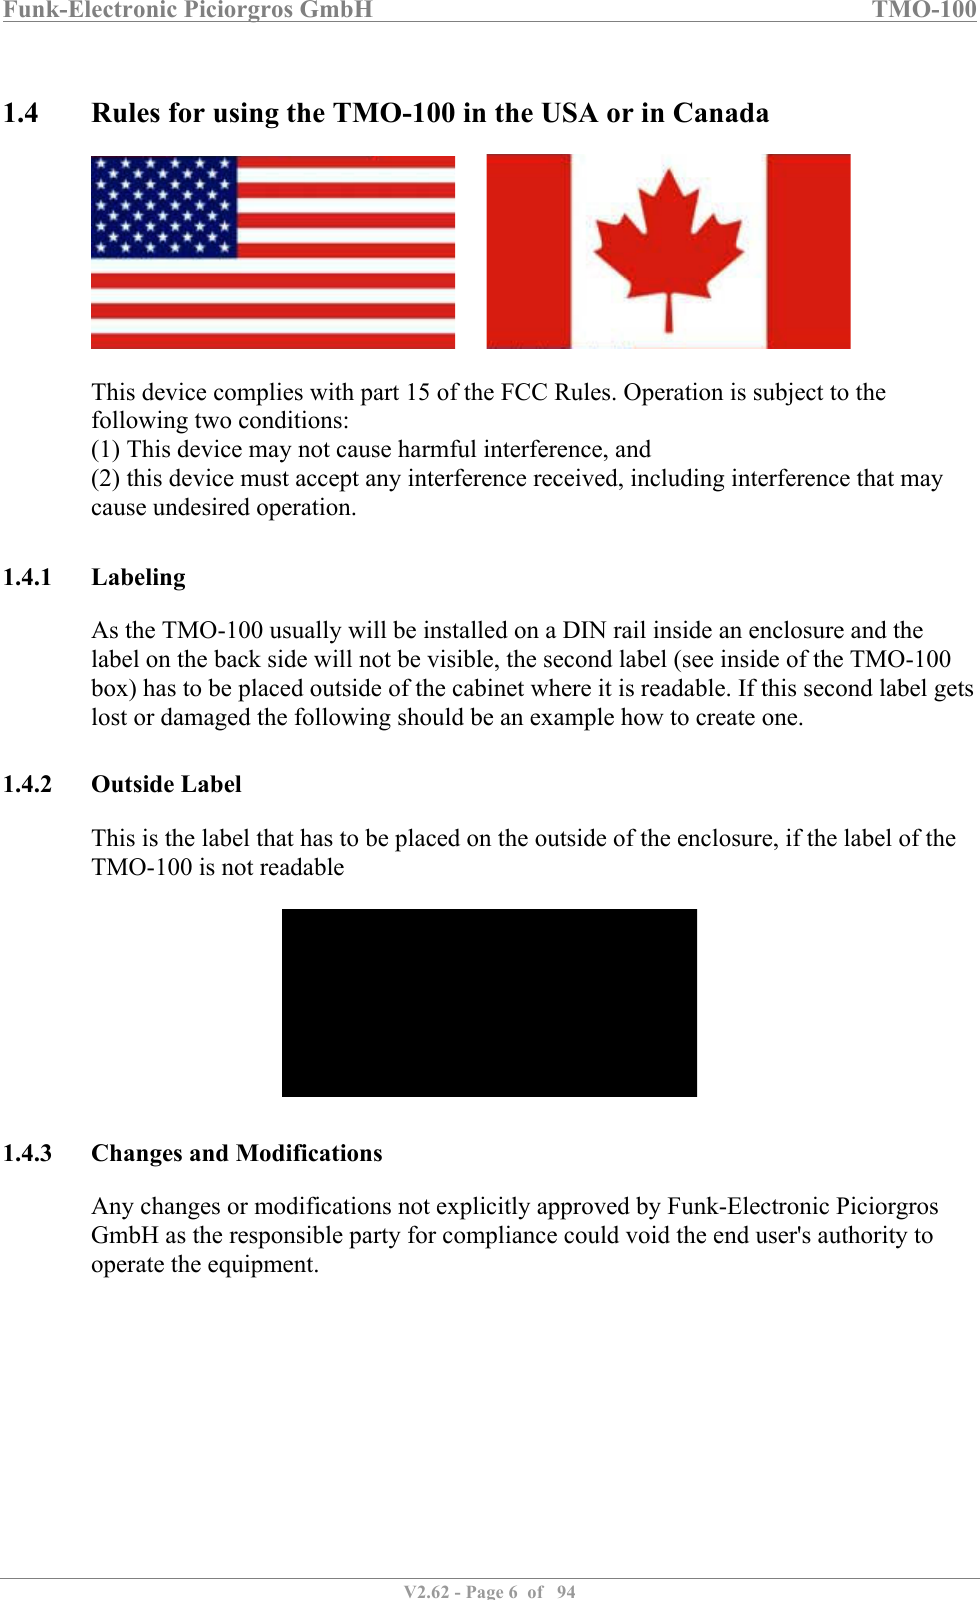 Funk-Electronic Piciorgros GmbH   TMO-100   V2.62 - Page 6  of   94    1.4 Rules for using the TMO-100 in the USA or in Canada          This device complies with part 15 of the FCC Rules. Operation is subject to the following two conditions:  (1) This device may not cause harmful interference, and  (2) this device must accept any interference received, including interference that may cause undesired operation.   1.4.1 Labeling As the TMO-100 usually will be installed on a DIN rail inside an enclosure and the label on the back side will not be visible, the second label (see inside of the TMO-100 box) has to be placed outside of the cabinet where it is readable. If this second label gets lost or damaged the following should be an example how to create one.  1.4.2 Outside Label This is the label that has to be placed on the outside of the enclosure, if the label of the TMO-100 is not readable    1.4.3 Changes and Modifications Any changes or modifications not explicitly approved by Funk-Electronic Piciorgros GmbH as the responsible party for compliance could void the end user&apos;s authority to operate the equipment.           